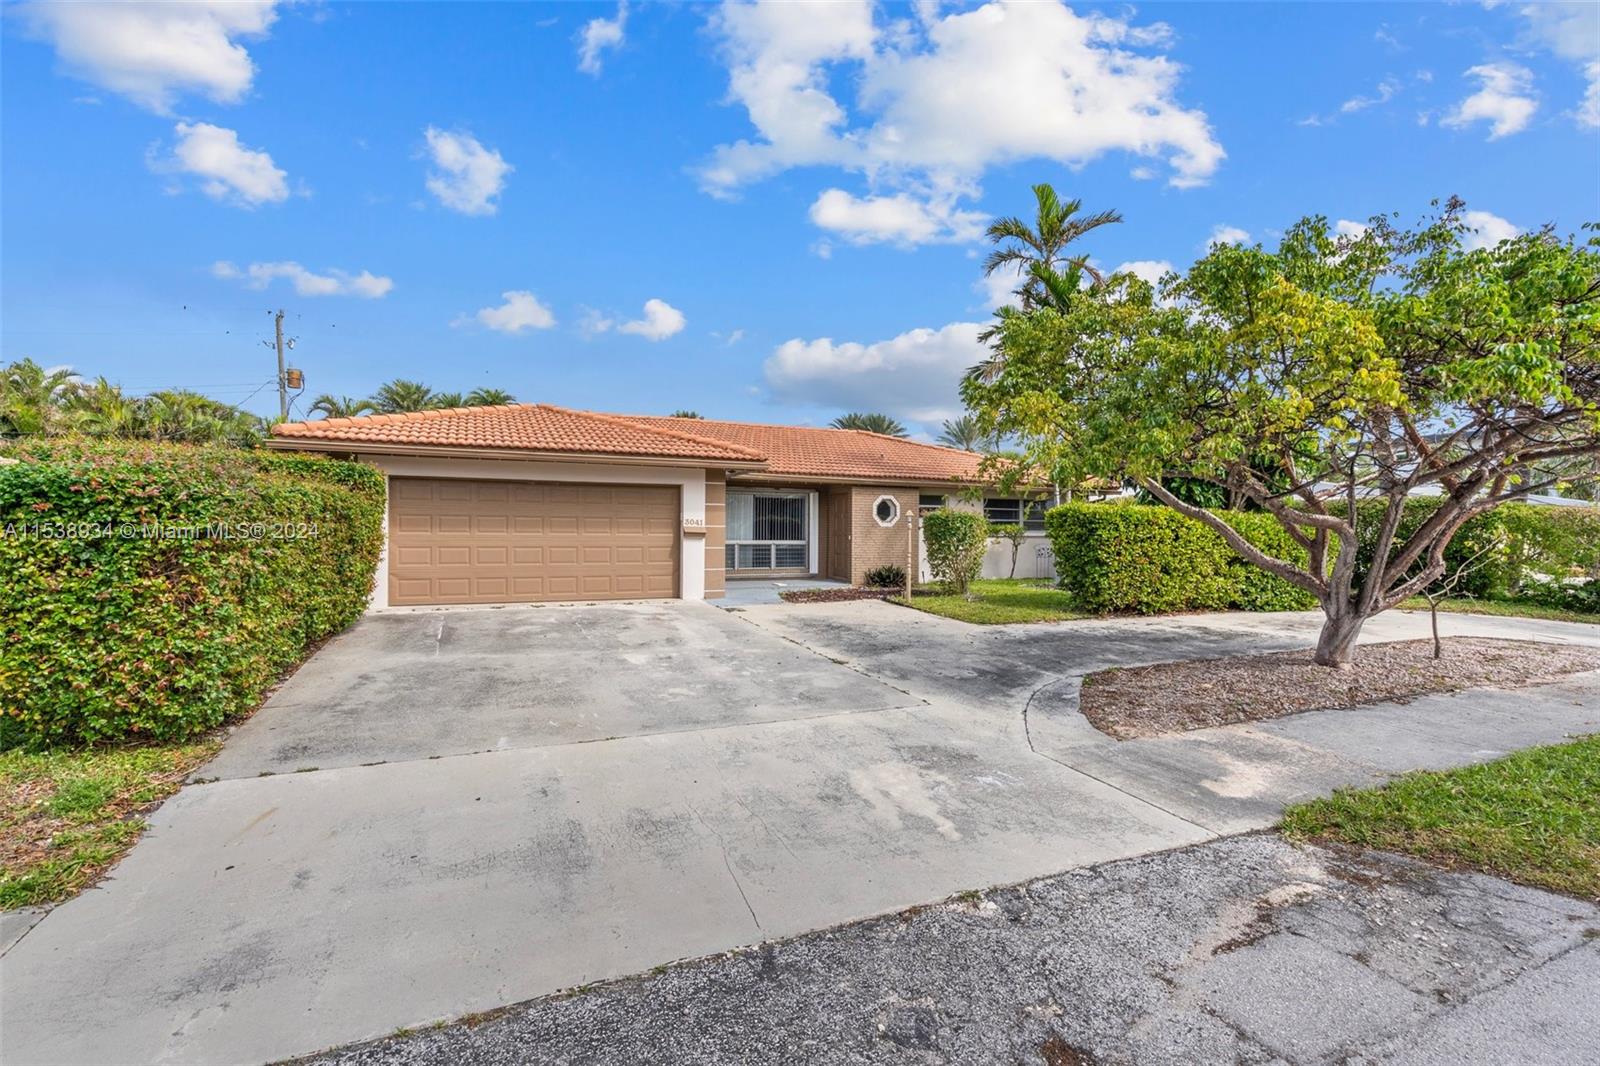 3041 NE 45th St, Lighthouse Point, Florida 33064, 3 Bedrooms Bedrooms, ,2 BathroomsBathrooms,Residential,For Sale,3041 NE 45th St,A11538934